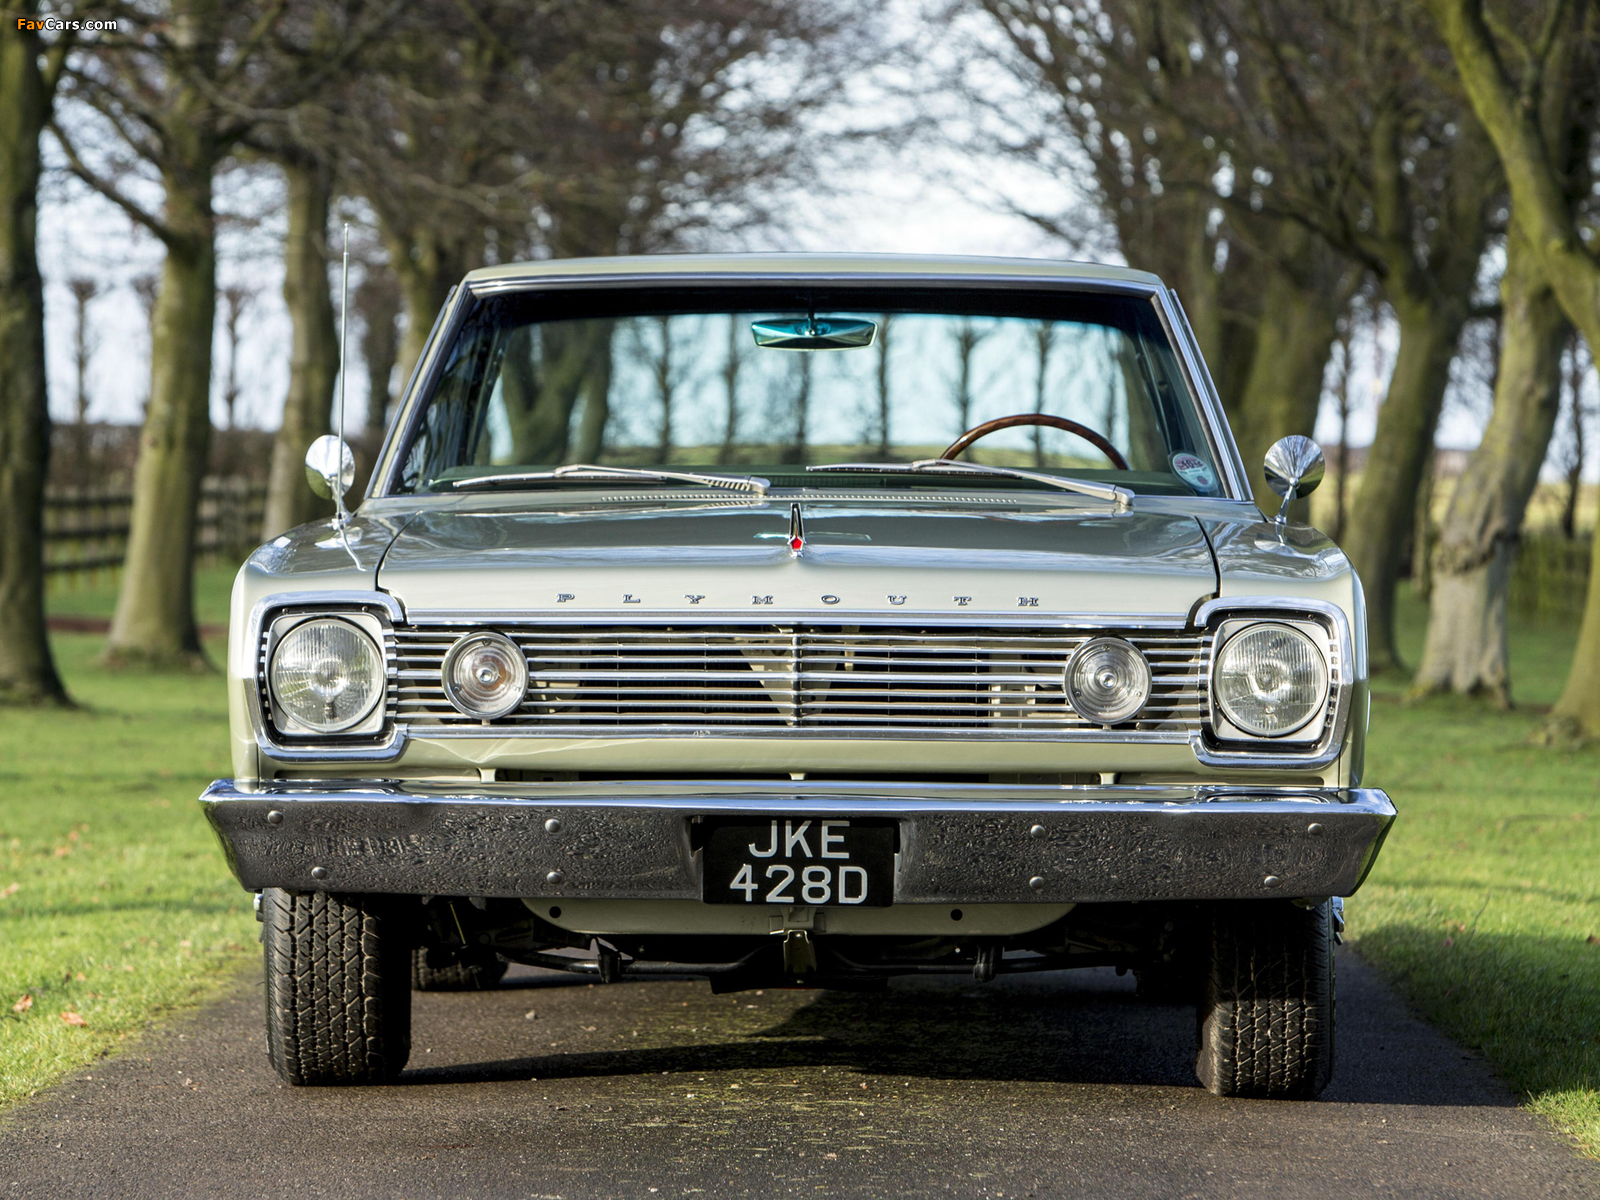 Plymouth Belvedere Satellite 426 Hemi Hardtop Coupe (RP23) 1966 images (1600 x 1200)